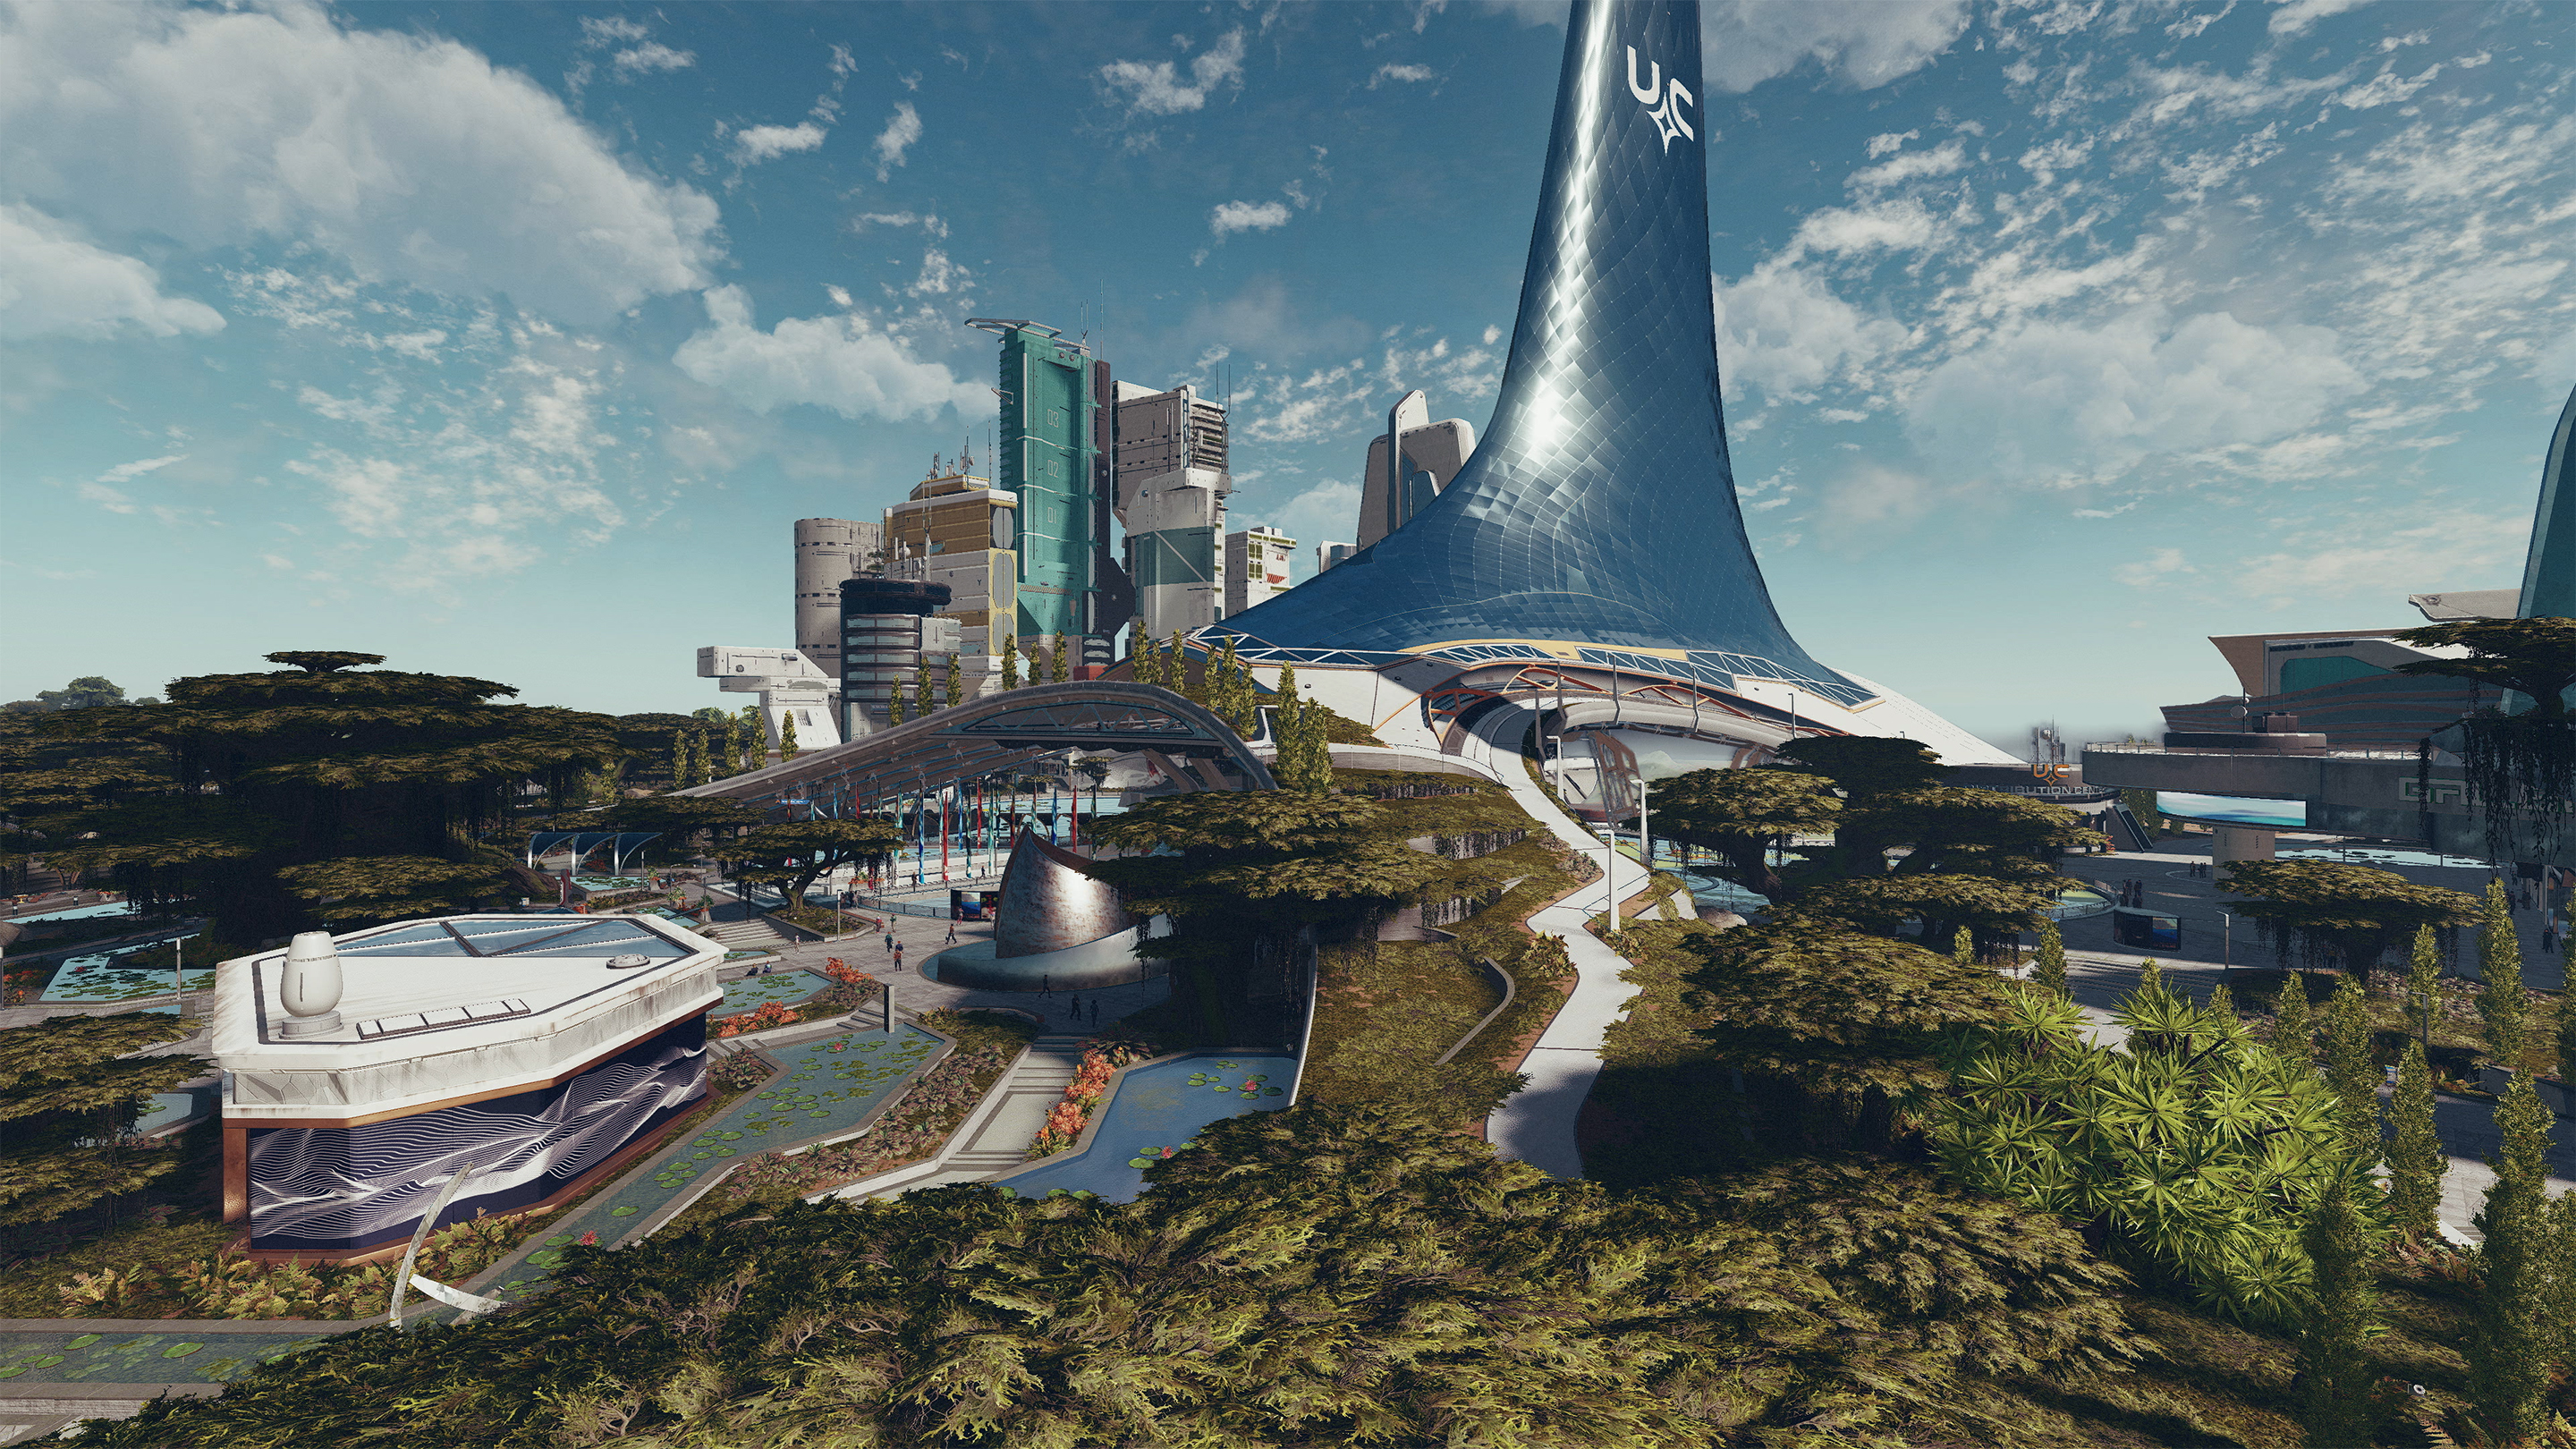 Starfield - New Atlantis: a futuristic city of glass buildings surrounded by manicured foliage.